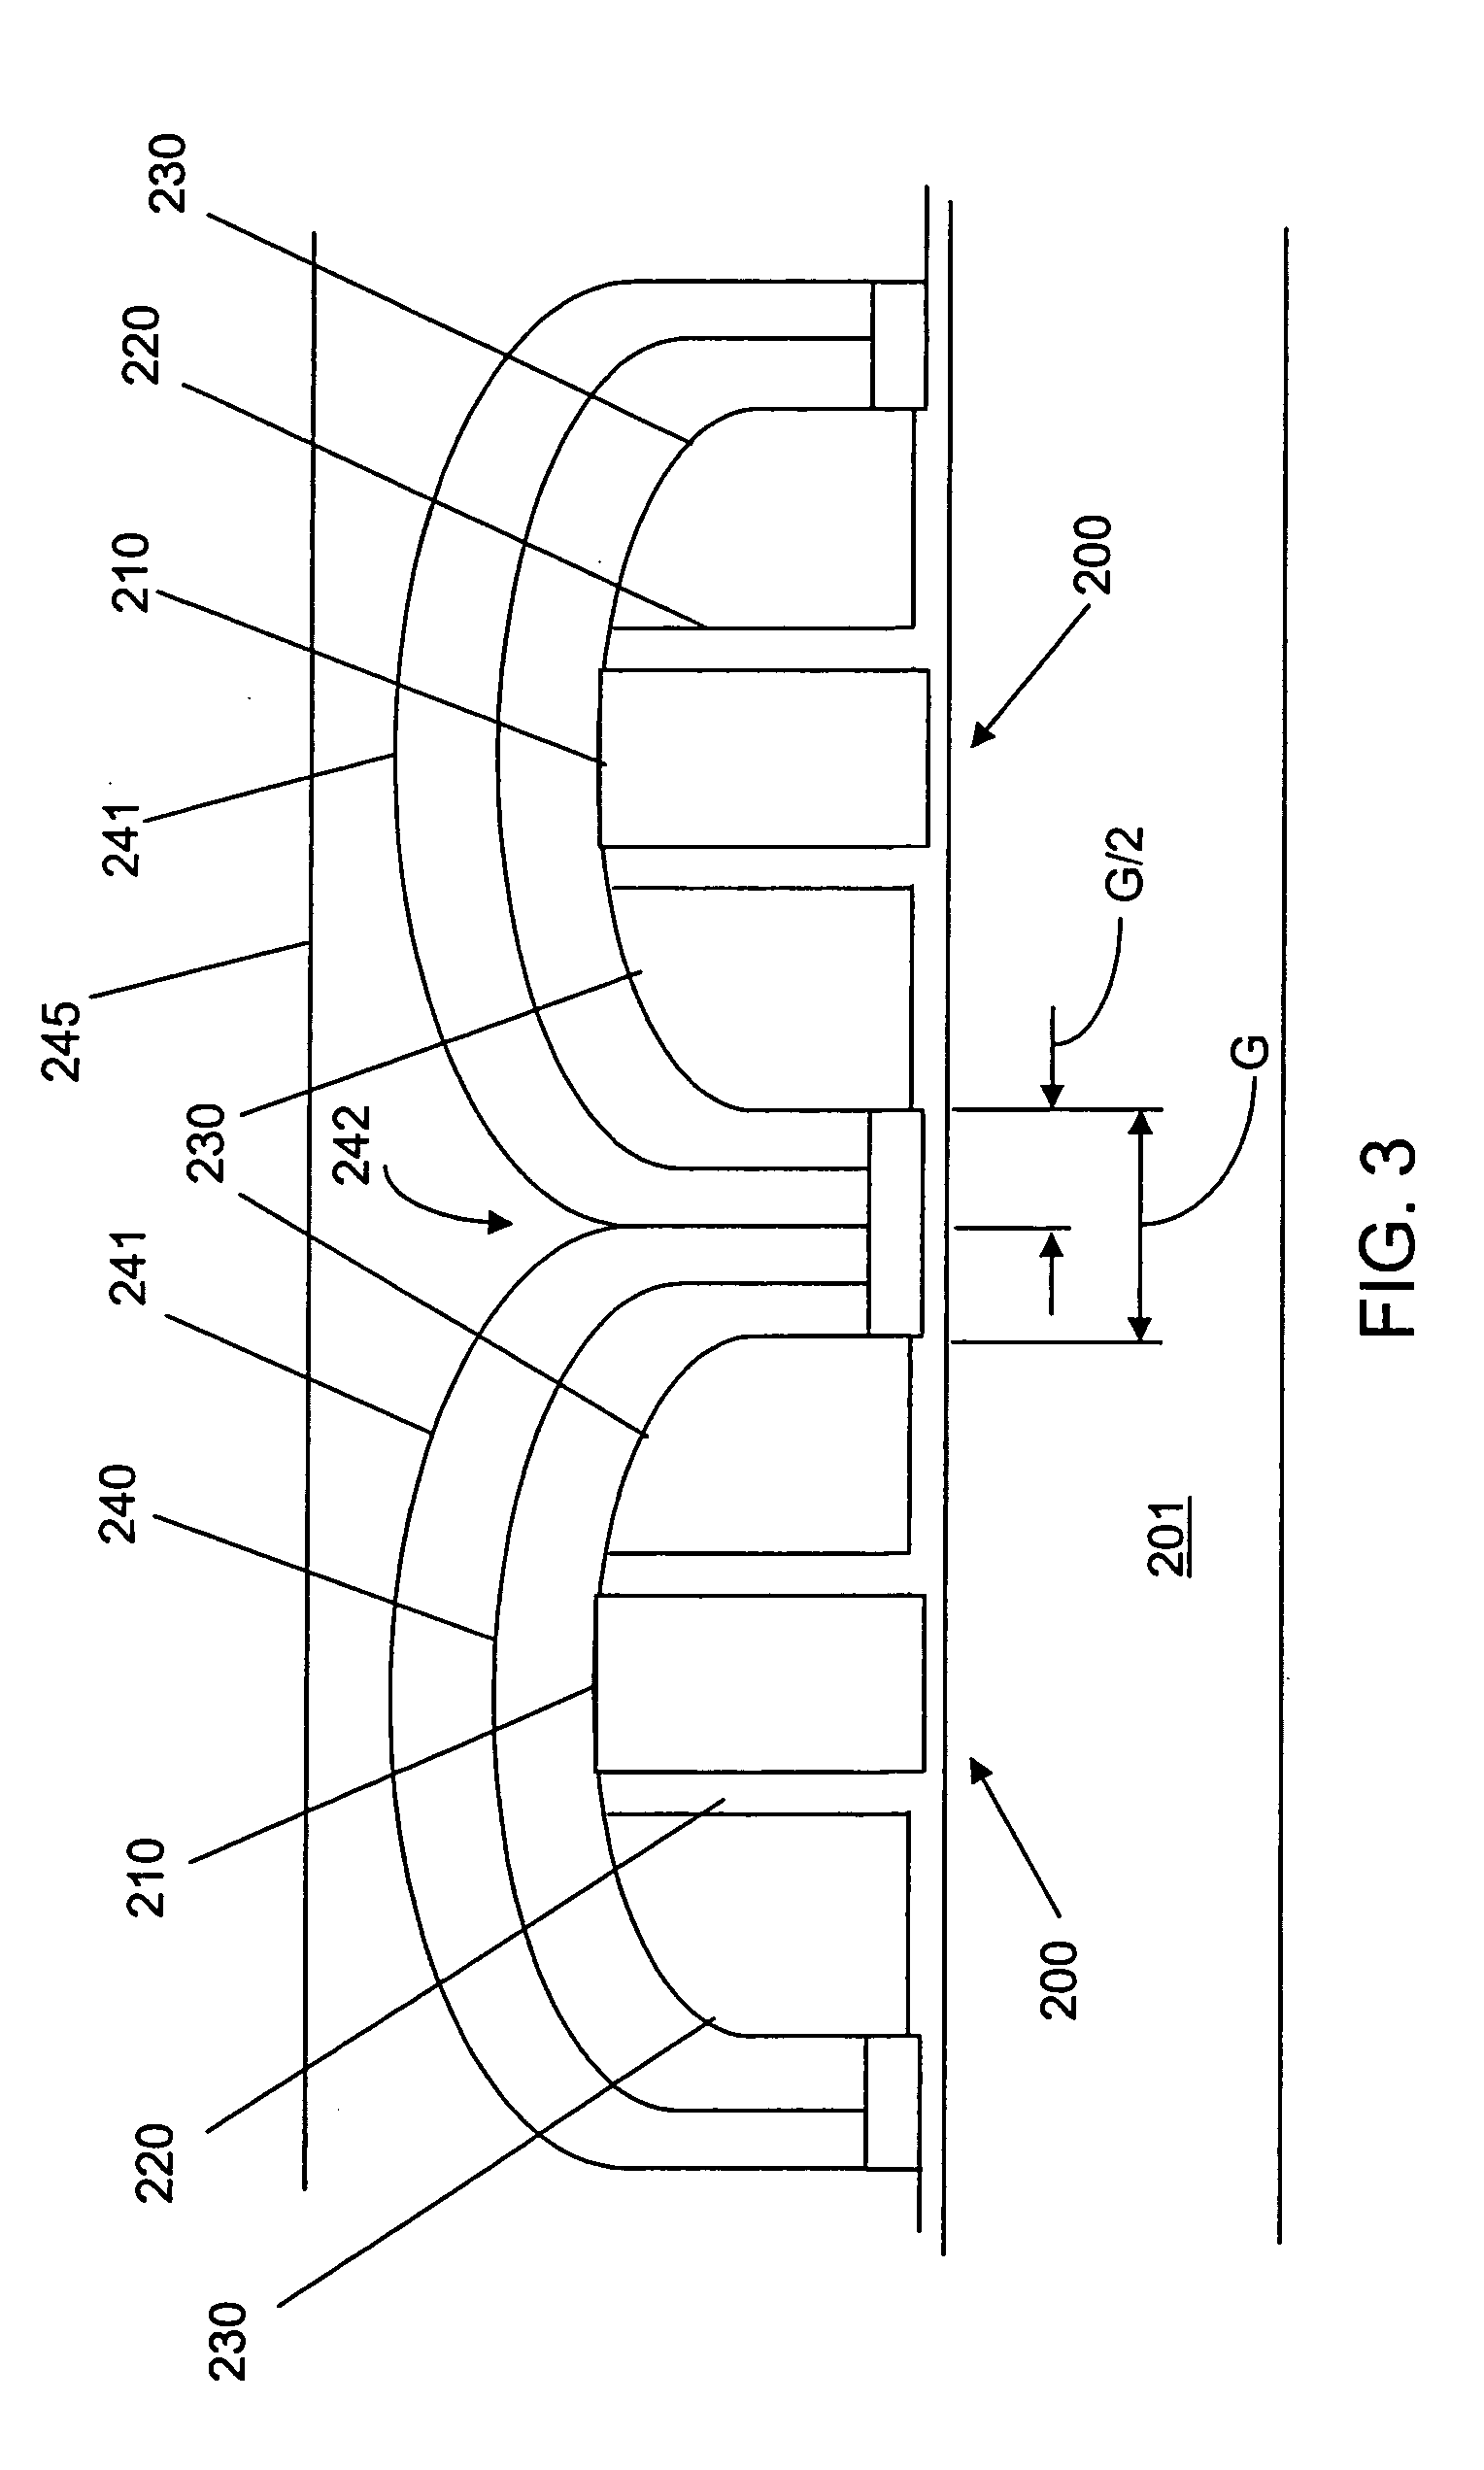 Atomic layer deposition for filling a gap between devices